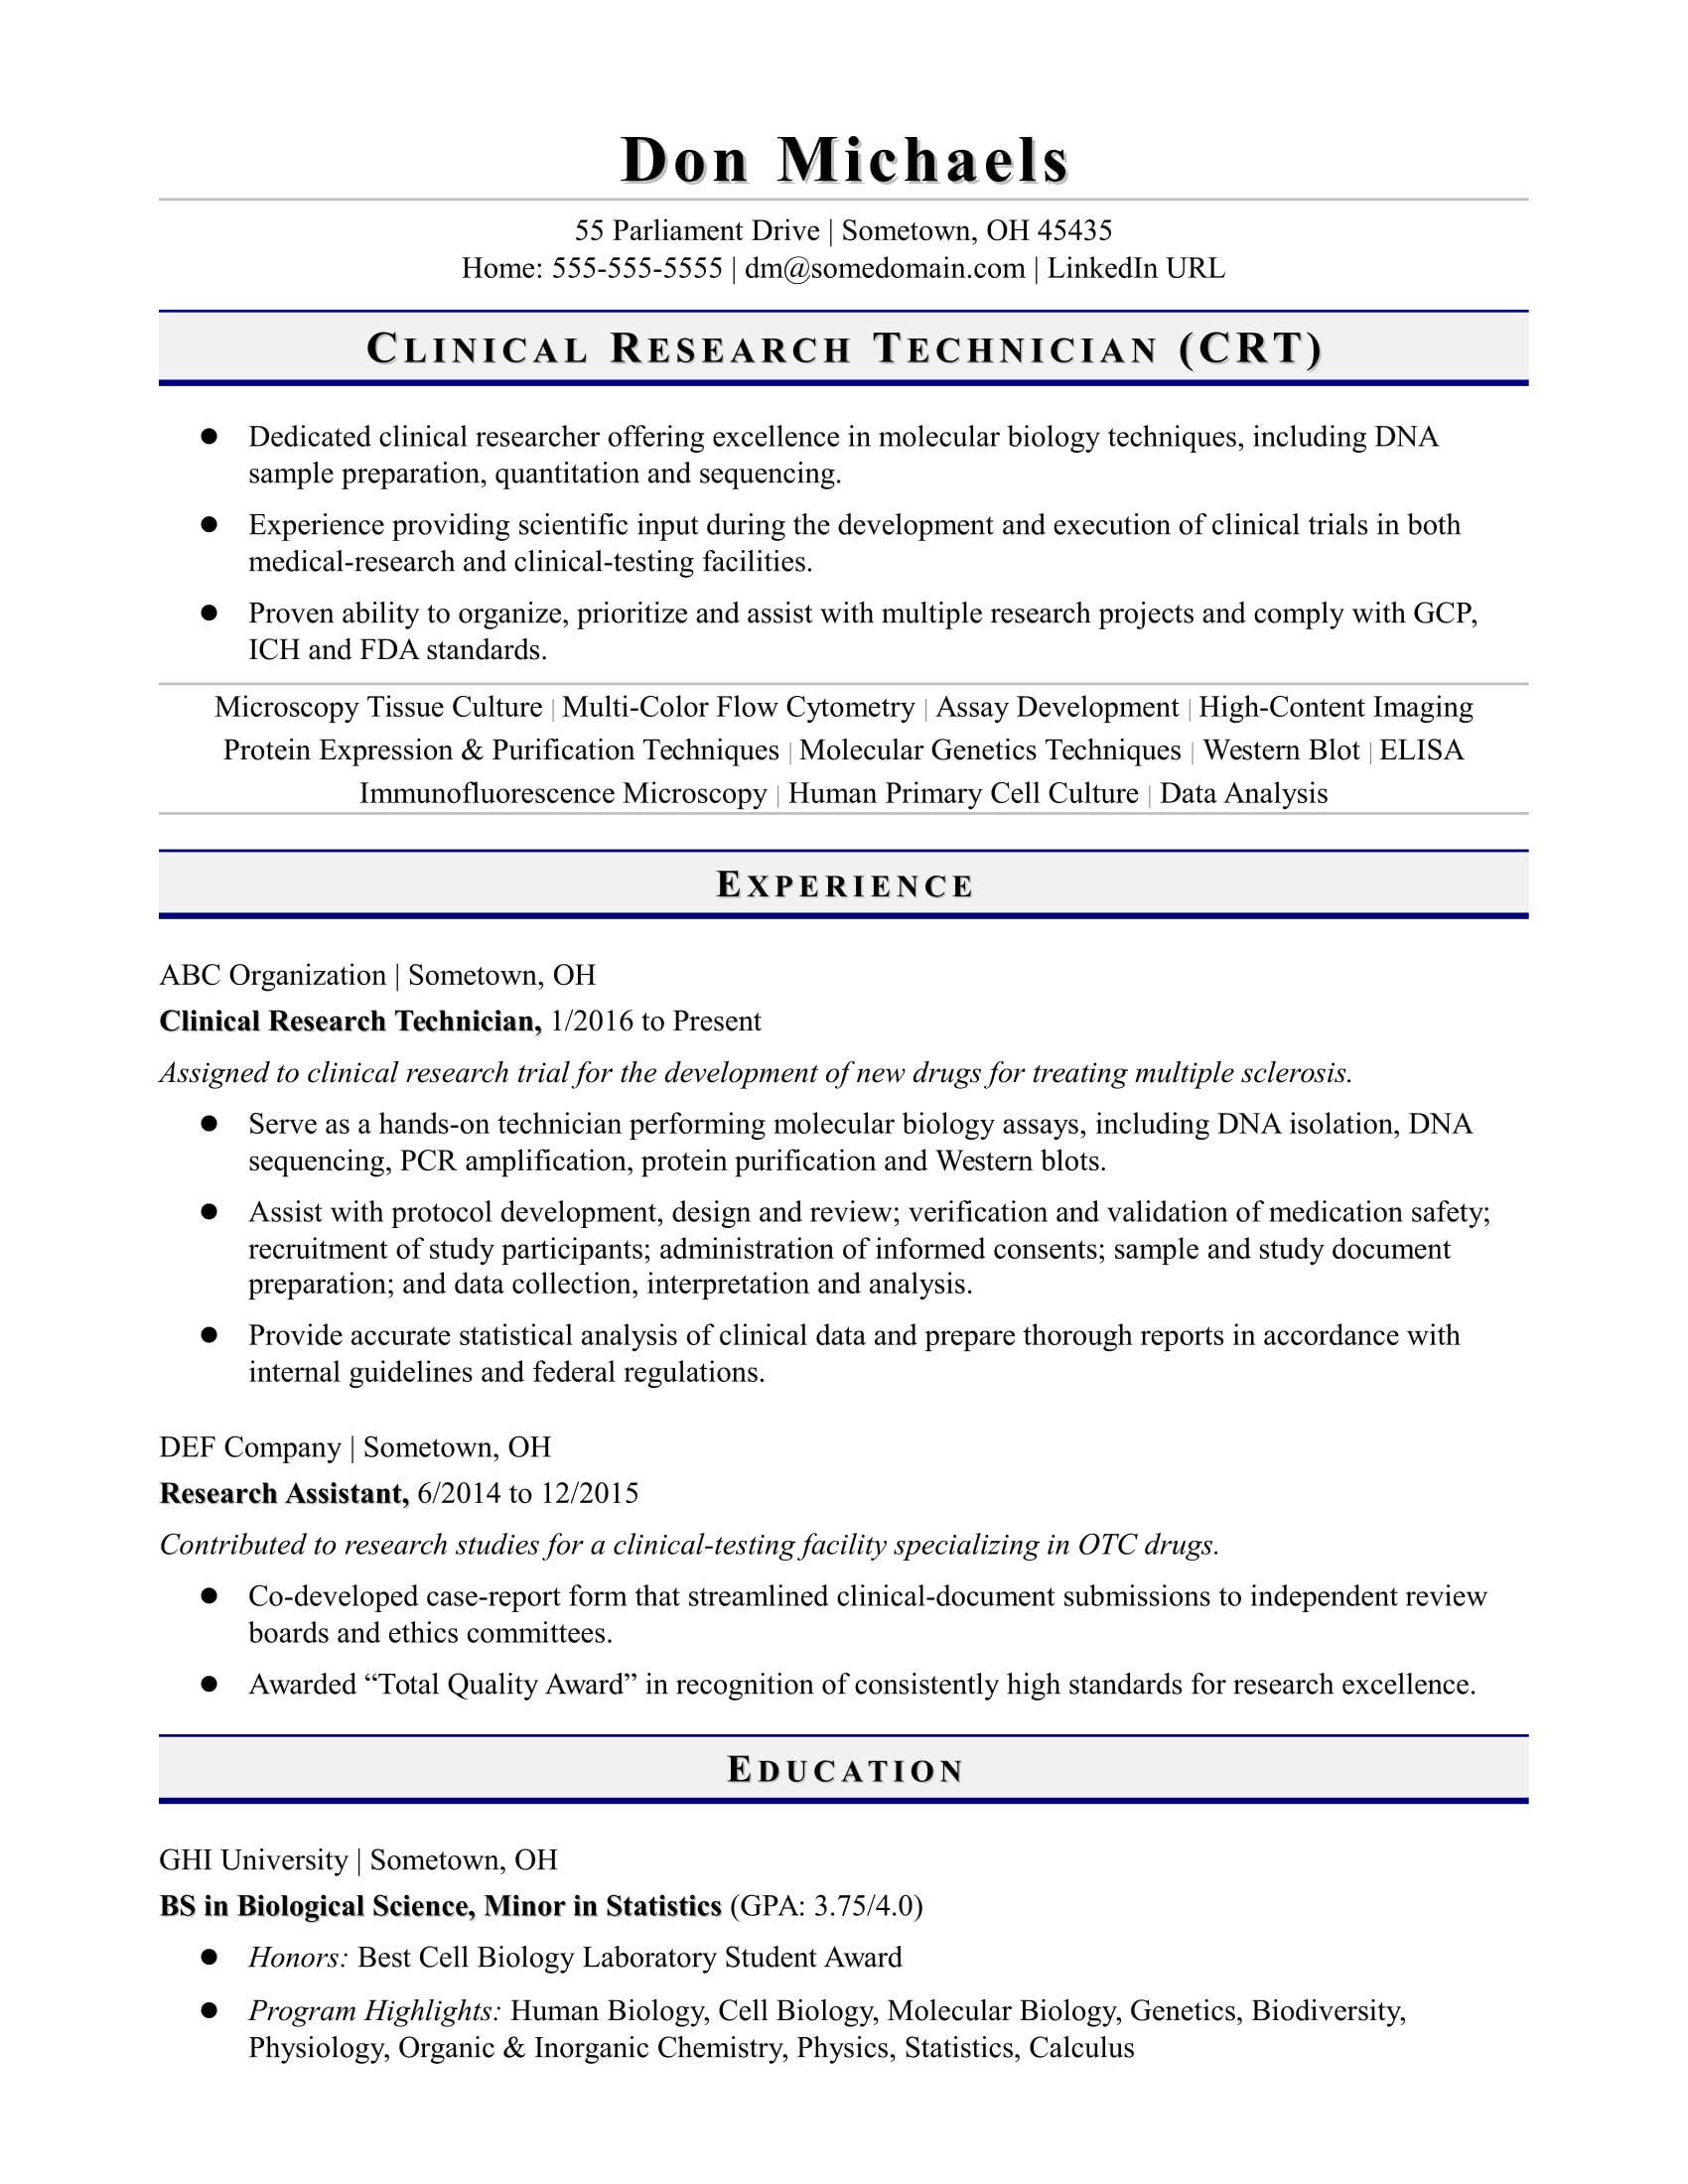 Sample Resume for Undergraduate Research assistant Entry-level Research Technician Resume Sample Monster.com